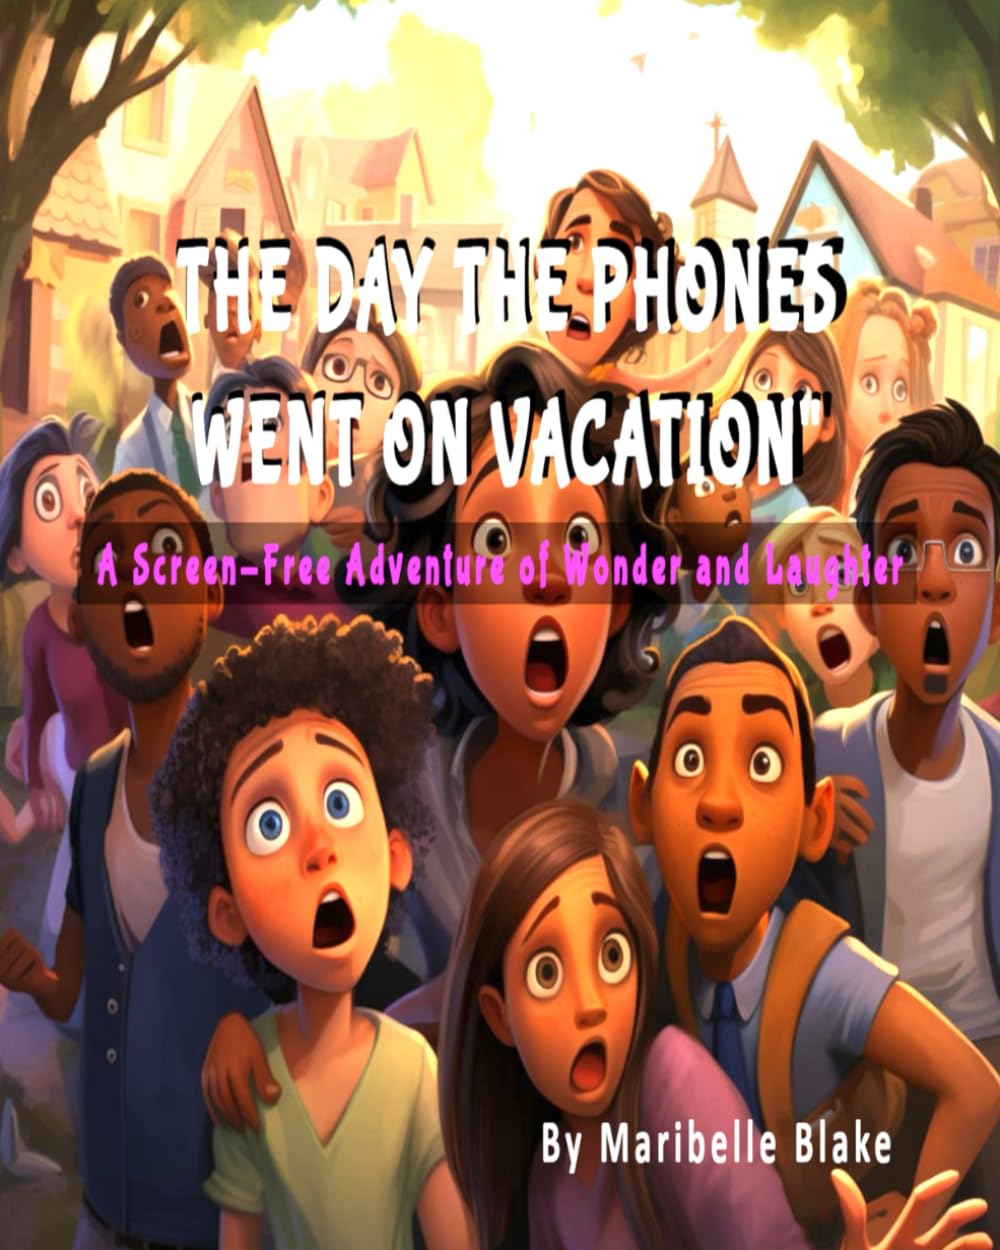 The Day the Phones Went on Vacation: A Screen-Free Adventure of Wonder and Laughter